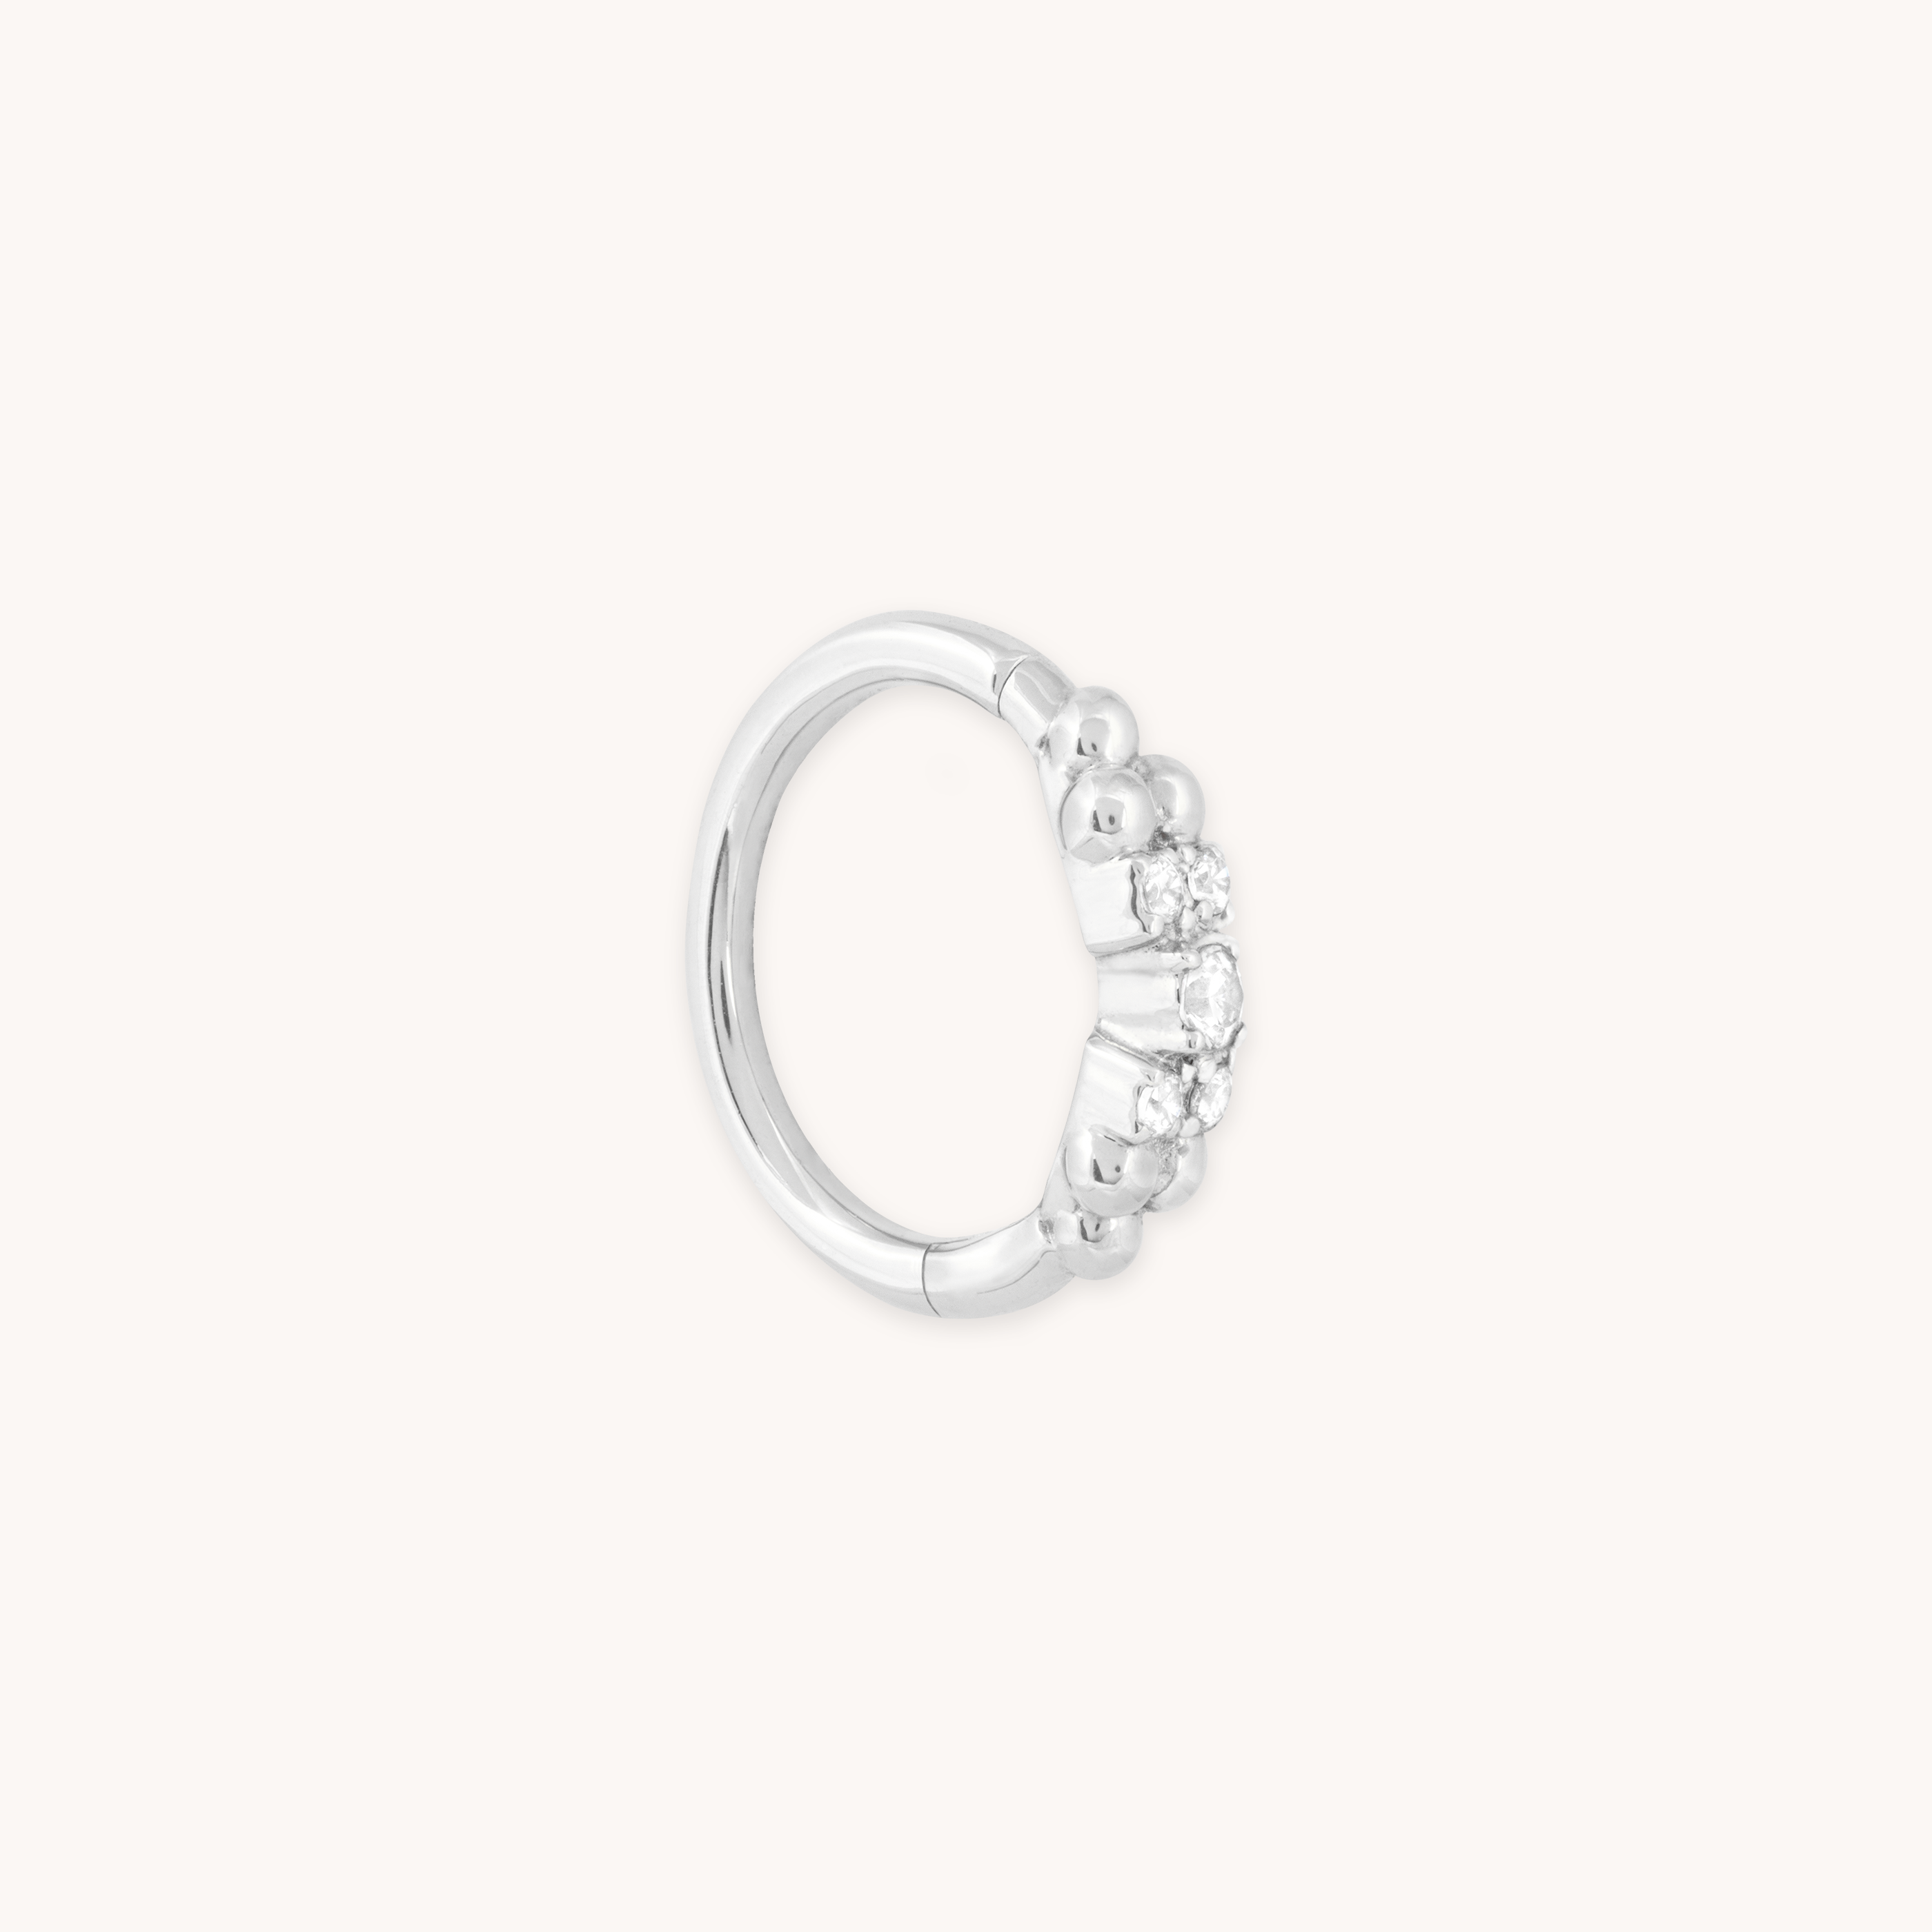 SOLID WHITE GOLD BEADED CRYSTAL PIERCING HOOP CUT OUT